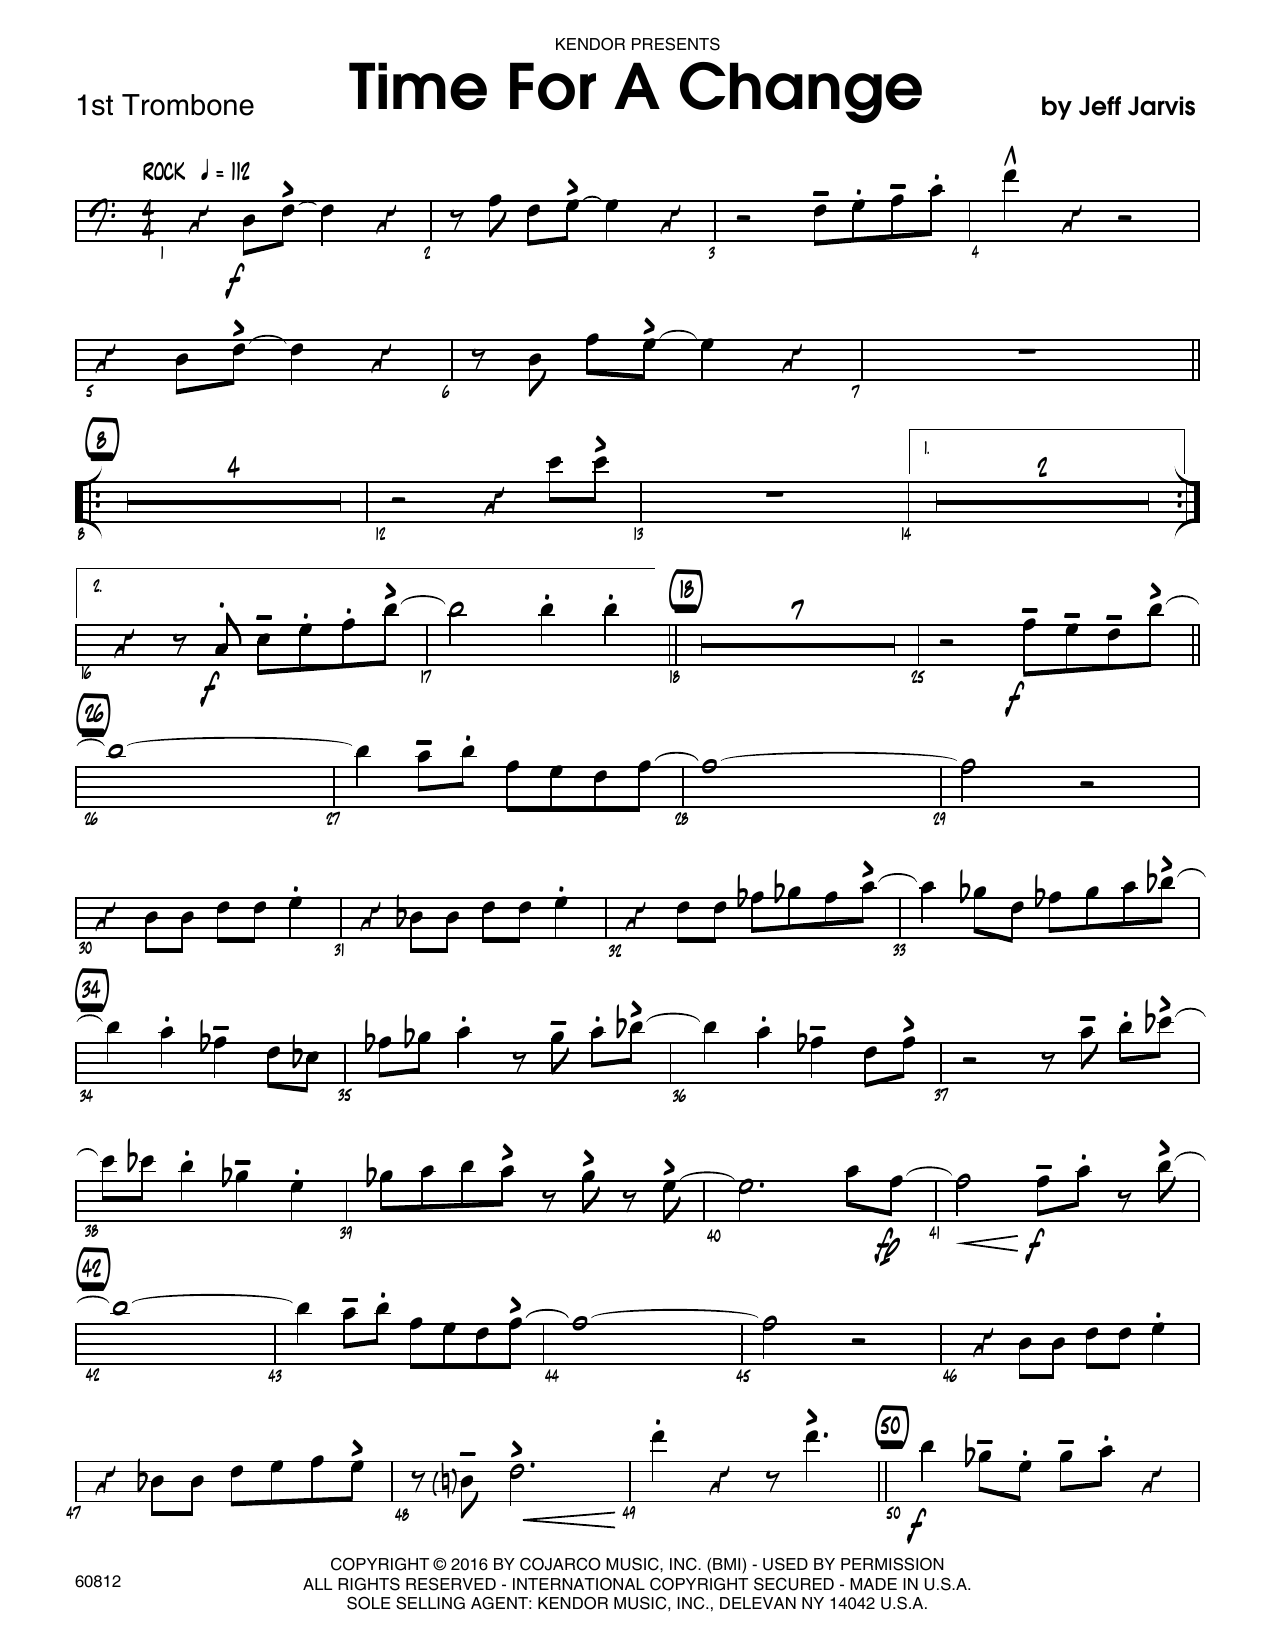 Download Jeff Jarvis Time For A Change - 1st Trombone Sheet Music